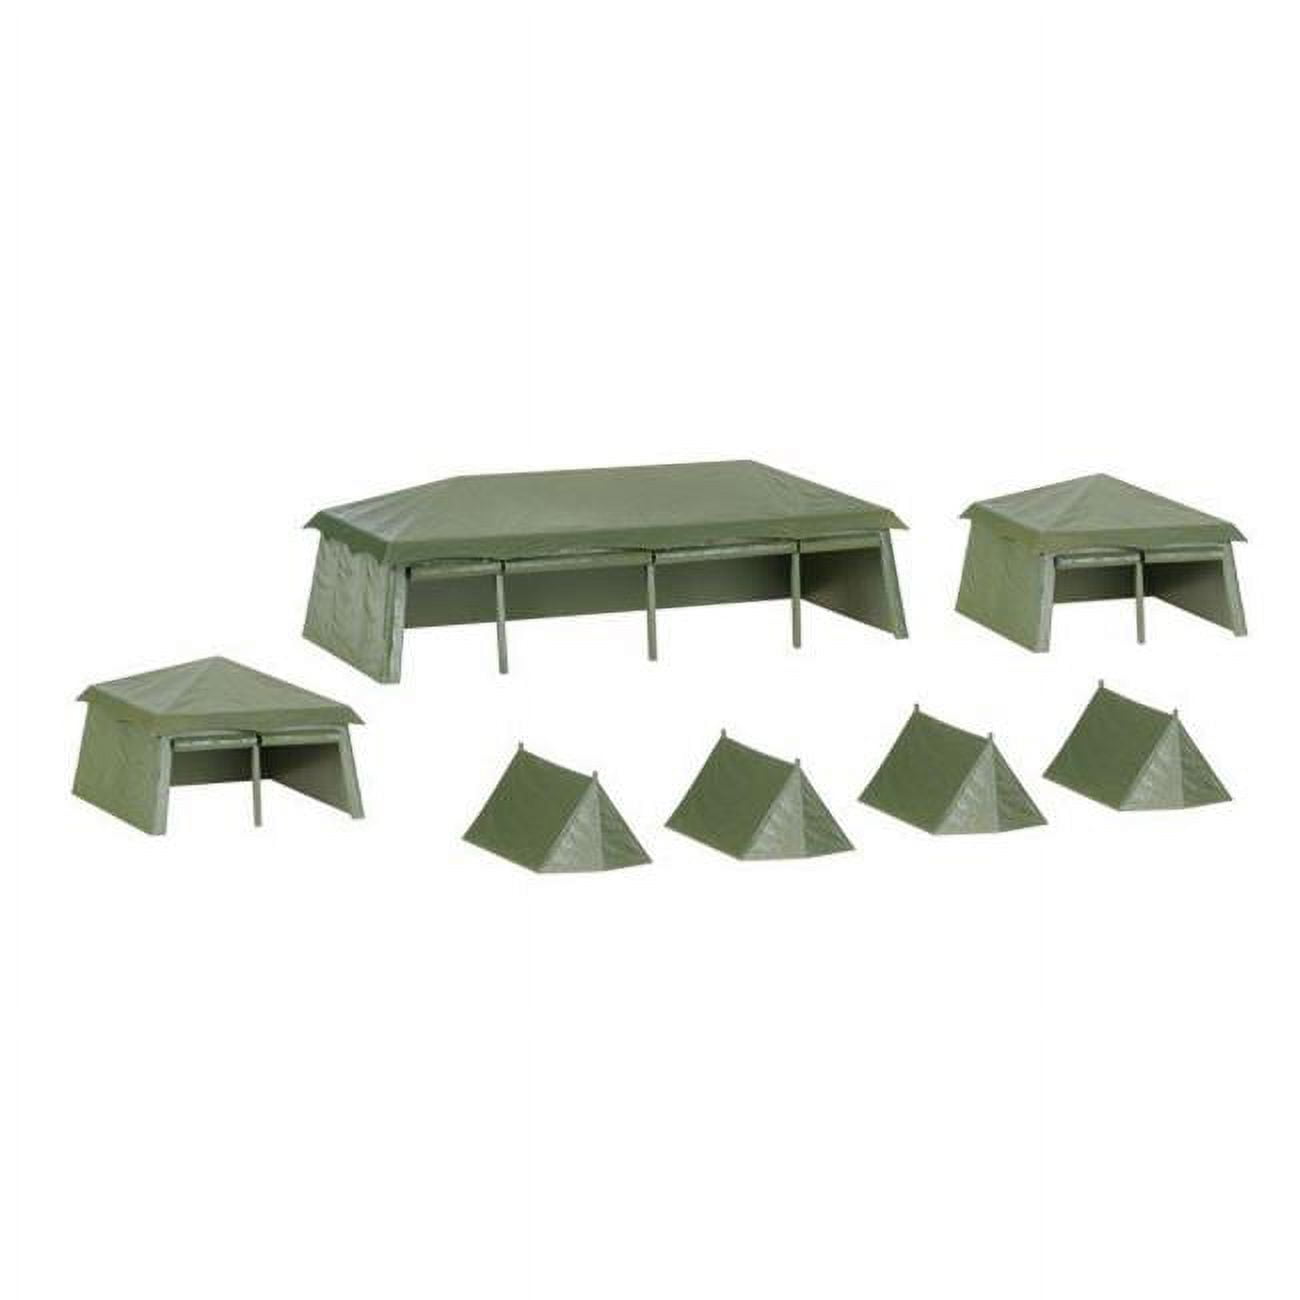 1-87 Military Assembly Kit Tents - 7 Piece